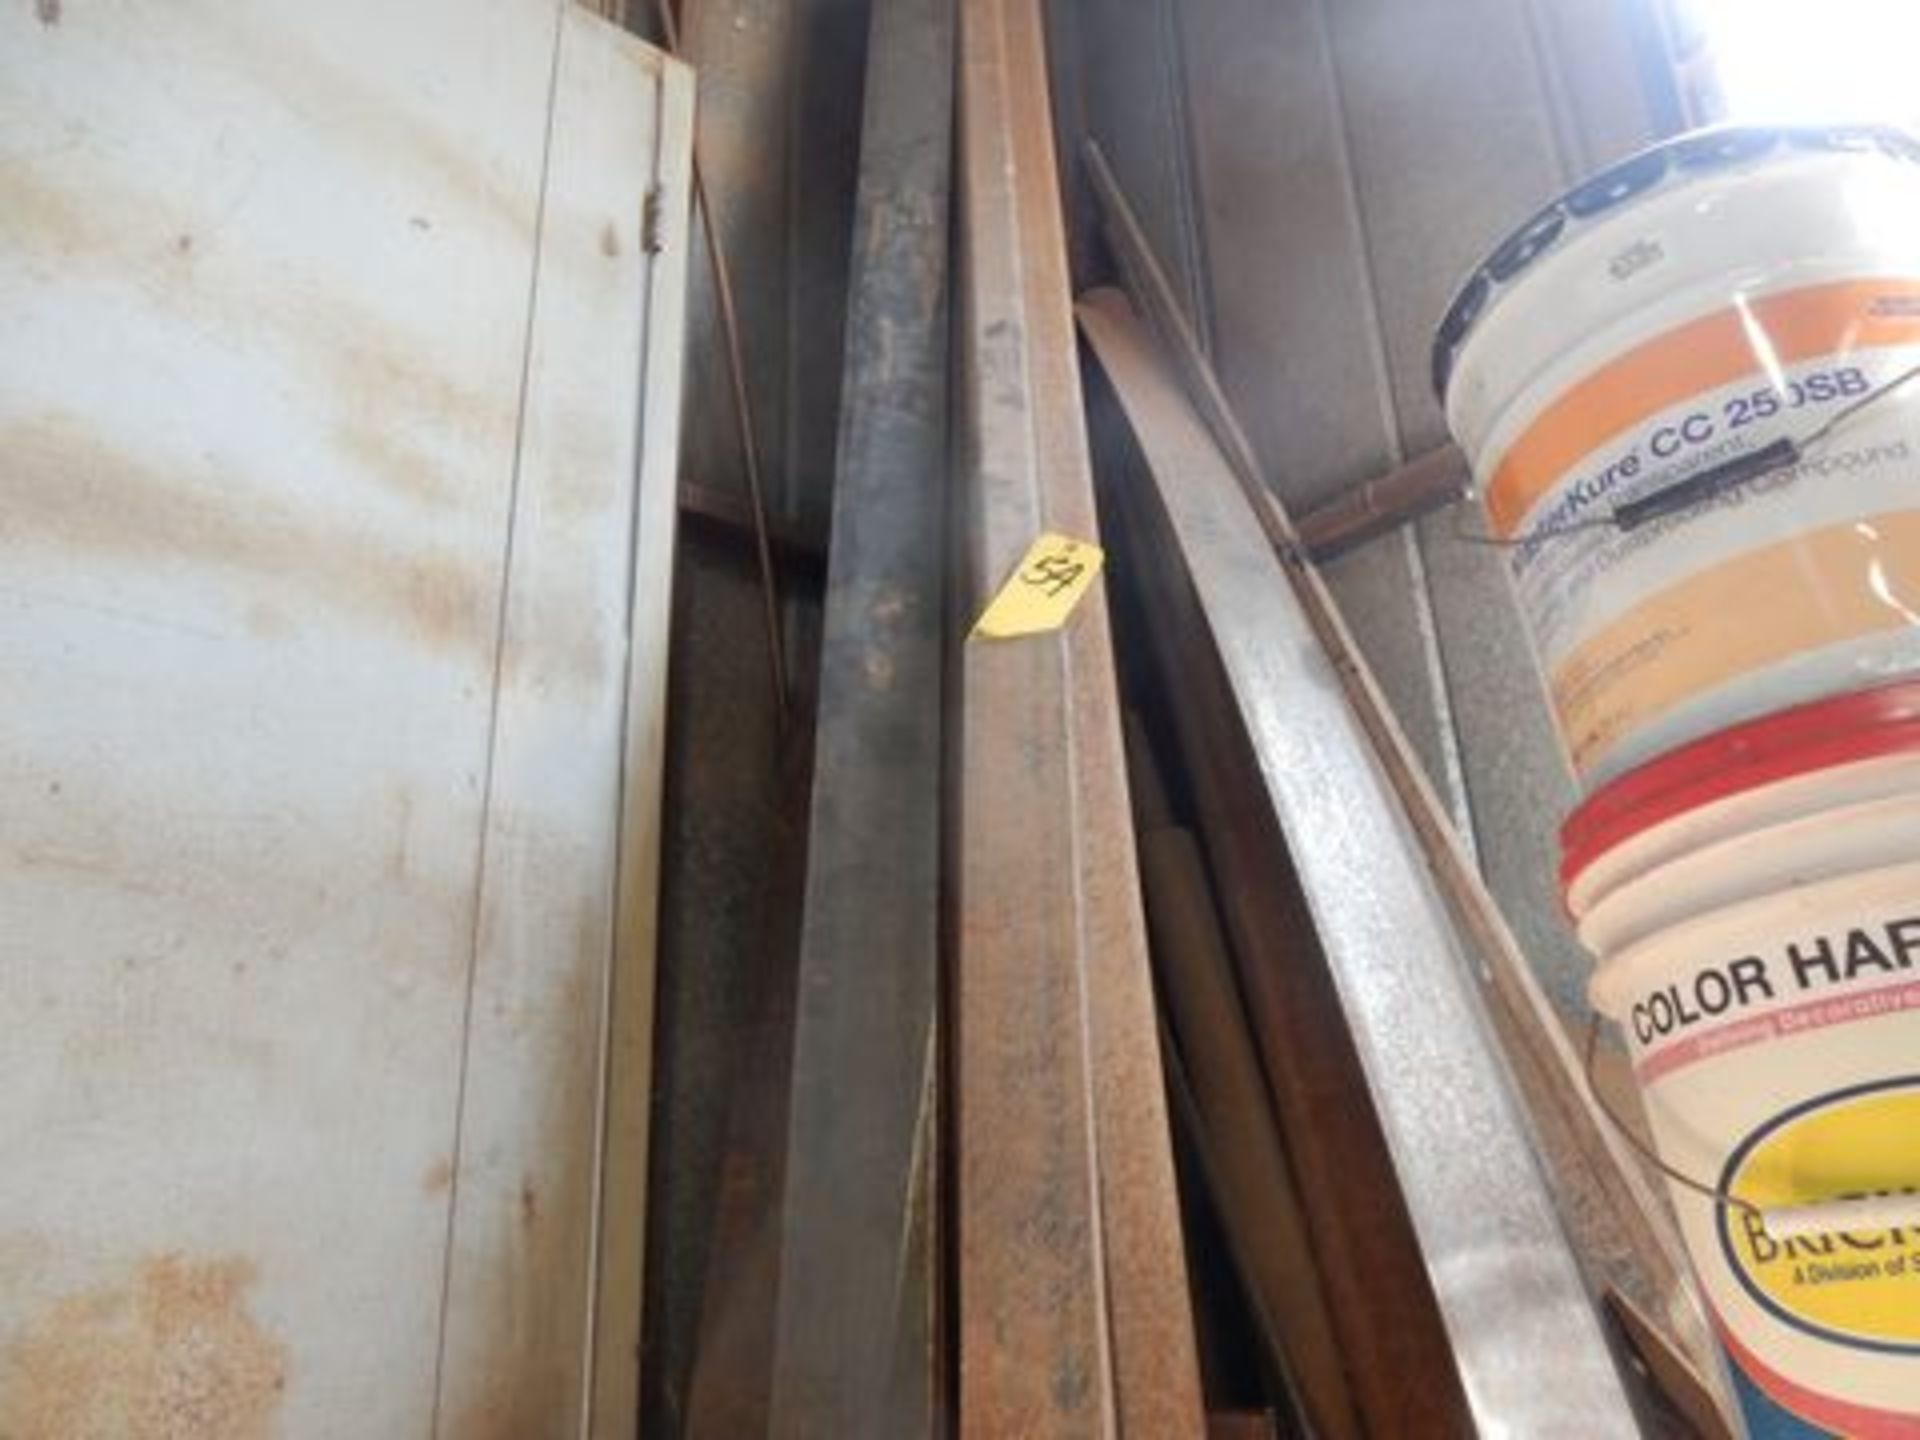 LOT ITEMS IN CORNER TO INCLUDE: MISC. STEEL TUBING, FLAT BAR, ETC.